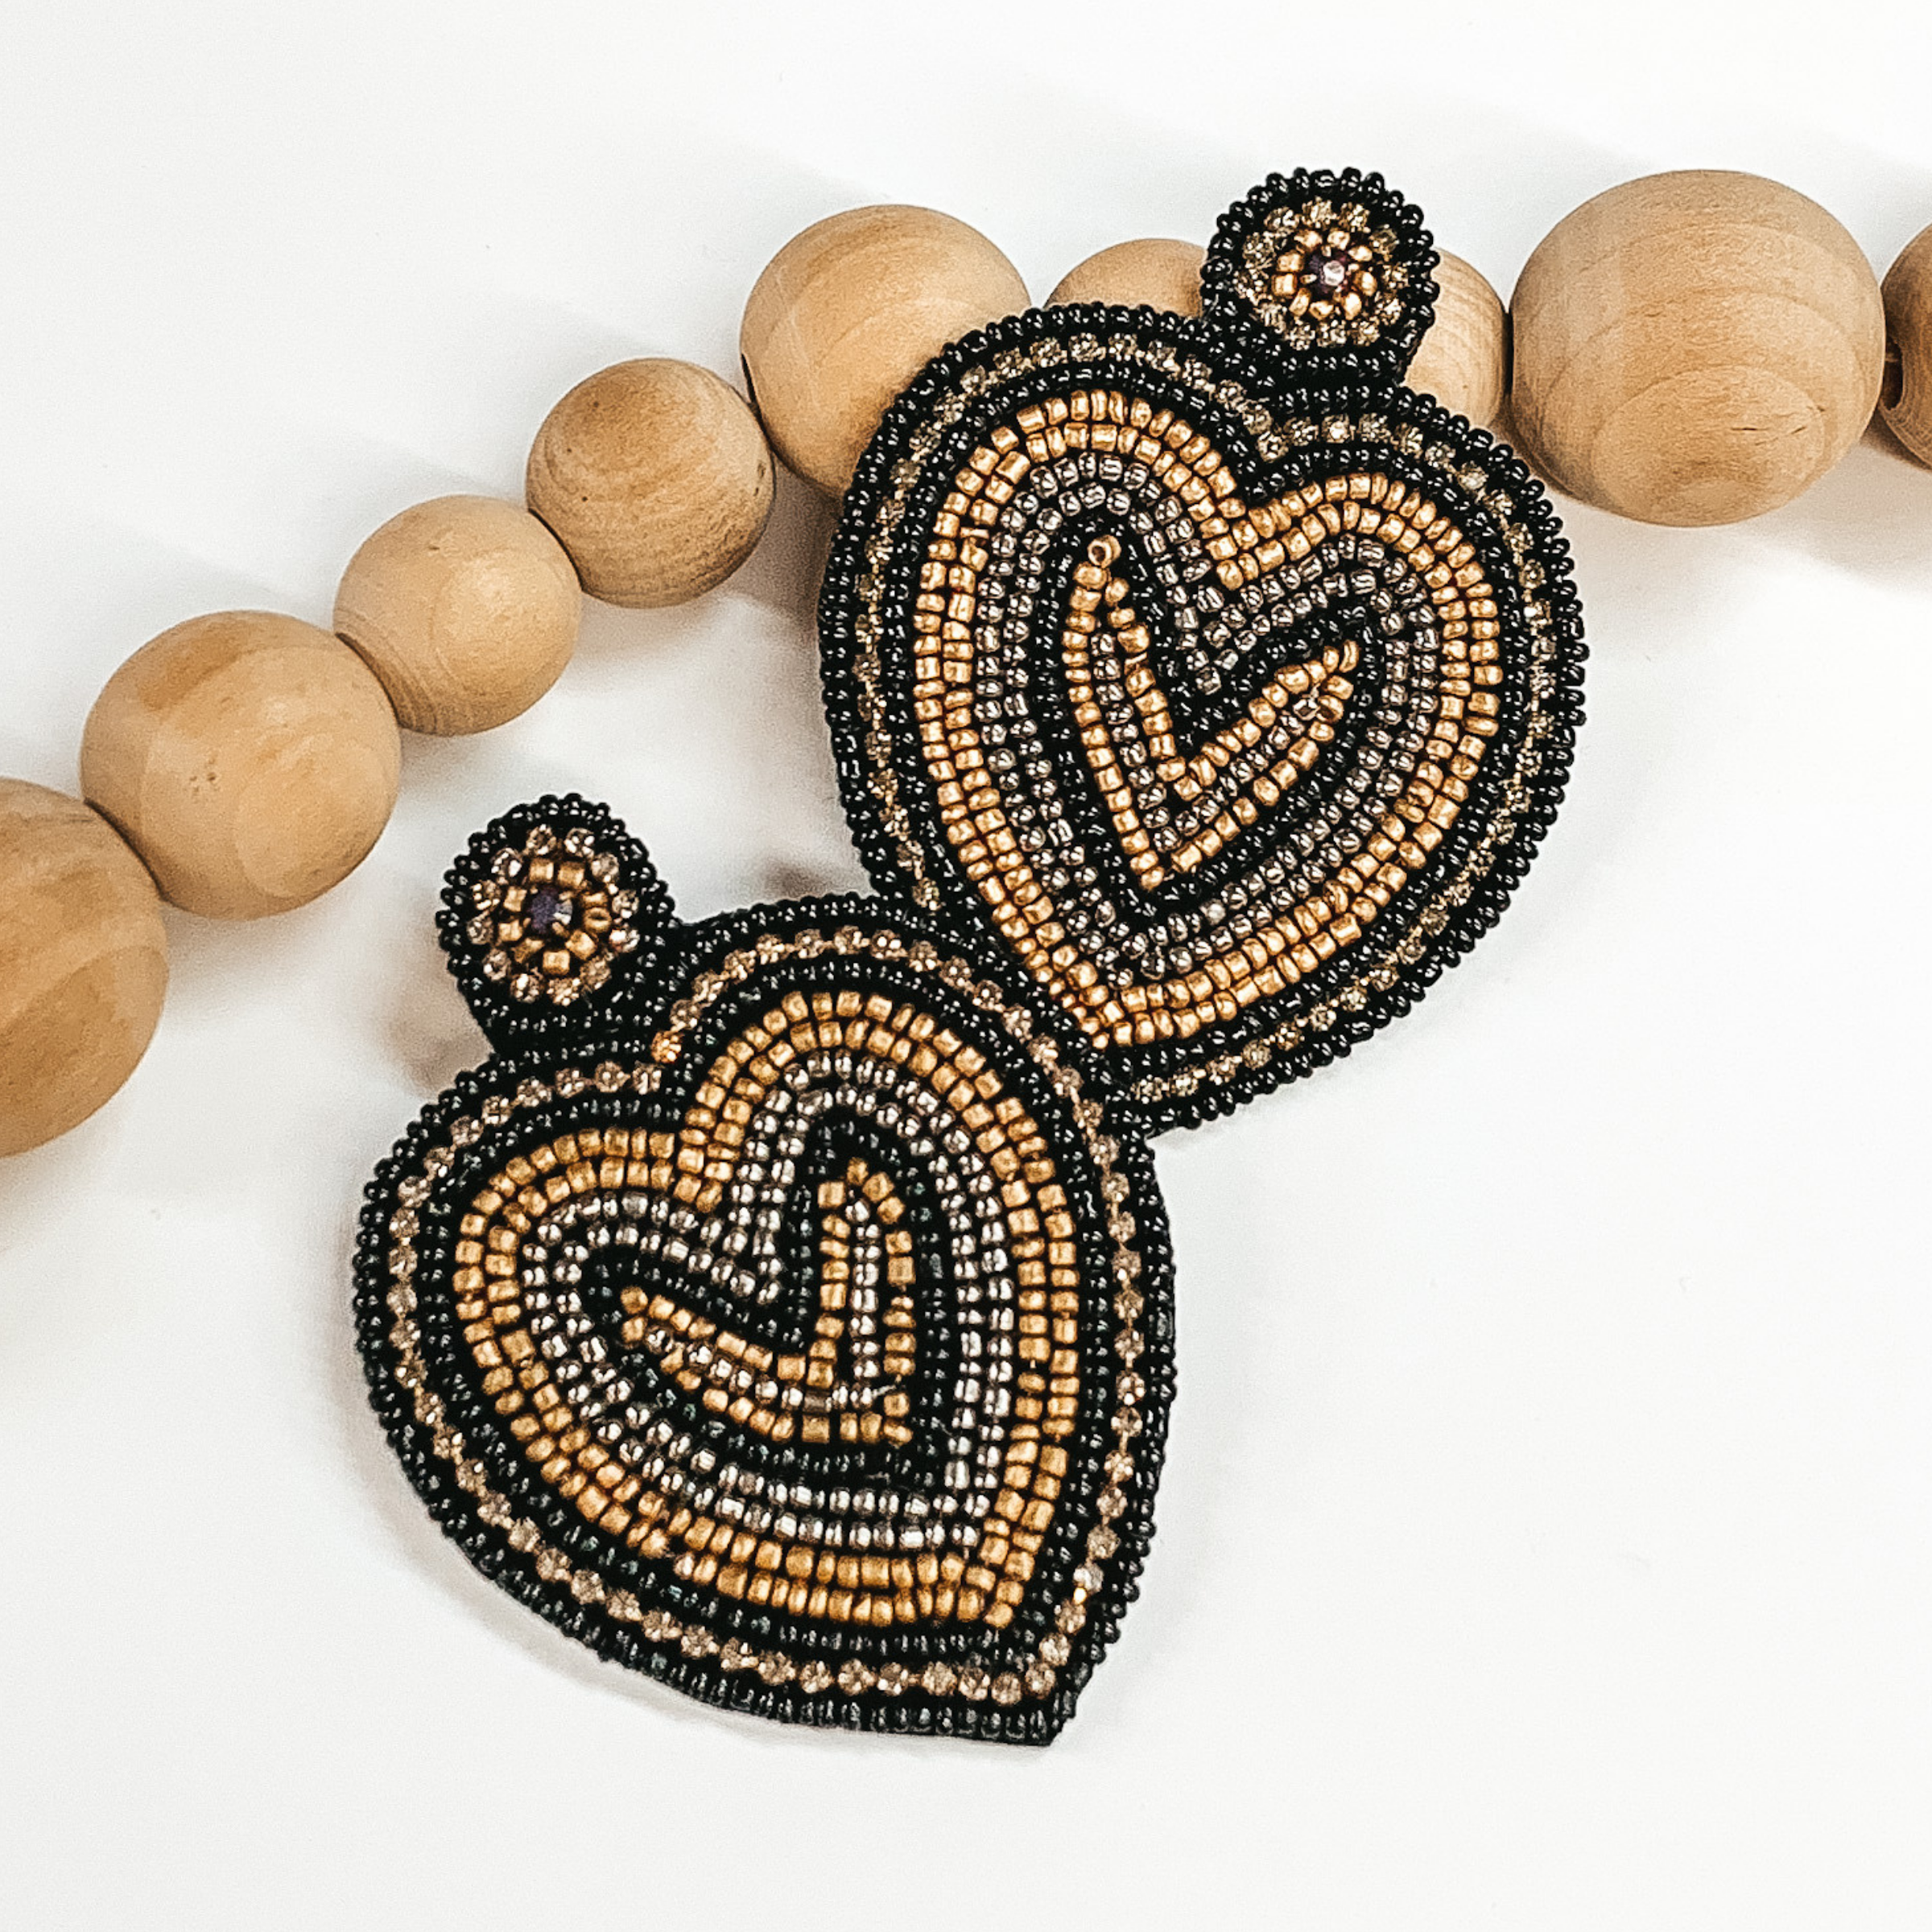 Heart seed beaded earrings in gold, black, silver beads with dark grey crystals in a heart pattern. Taken in a white background with brown beads  as decor.